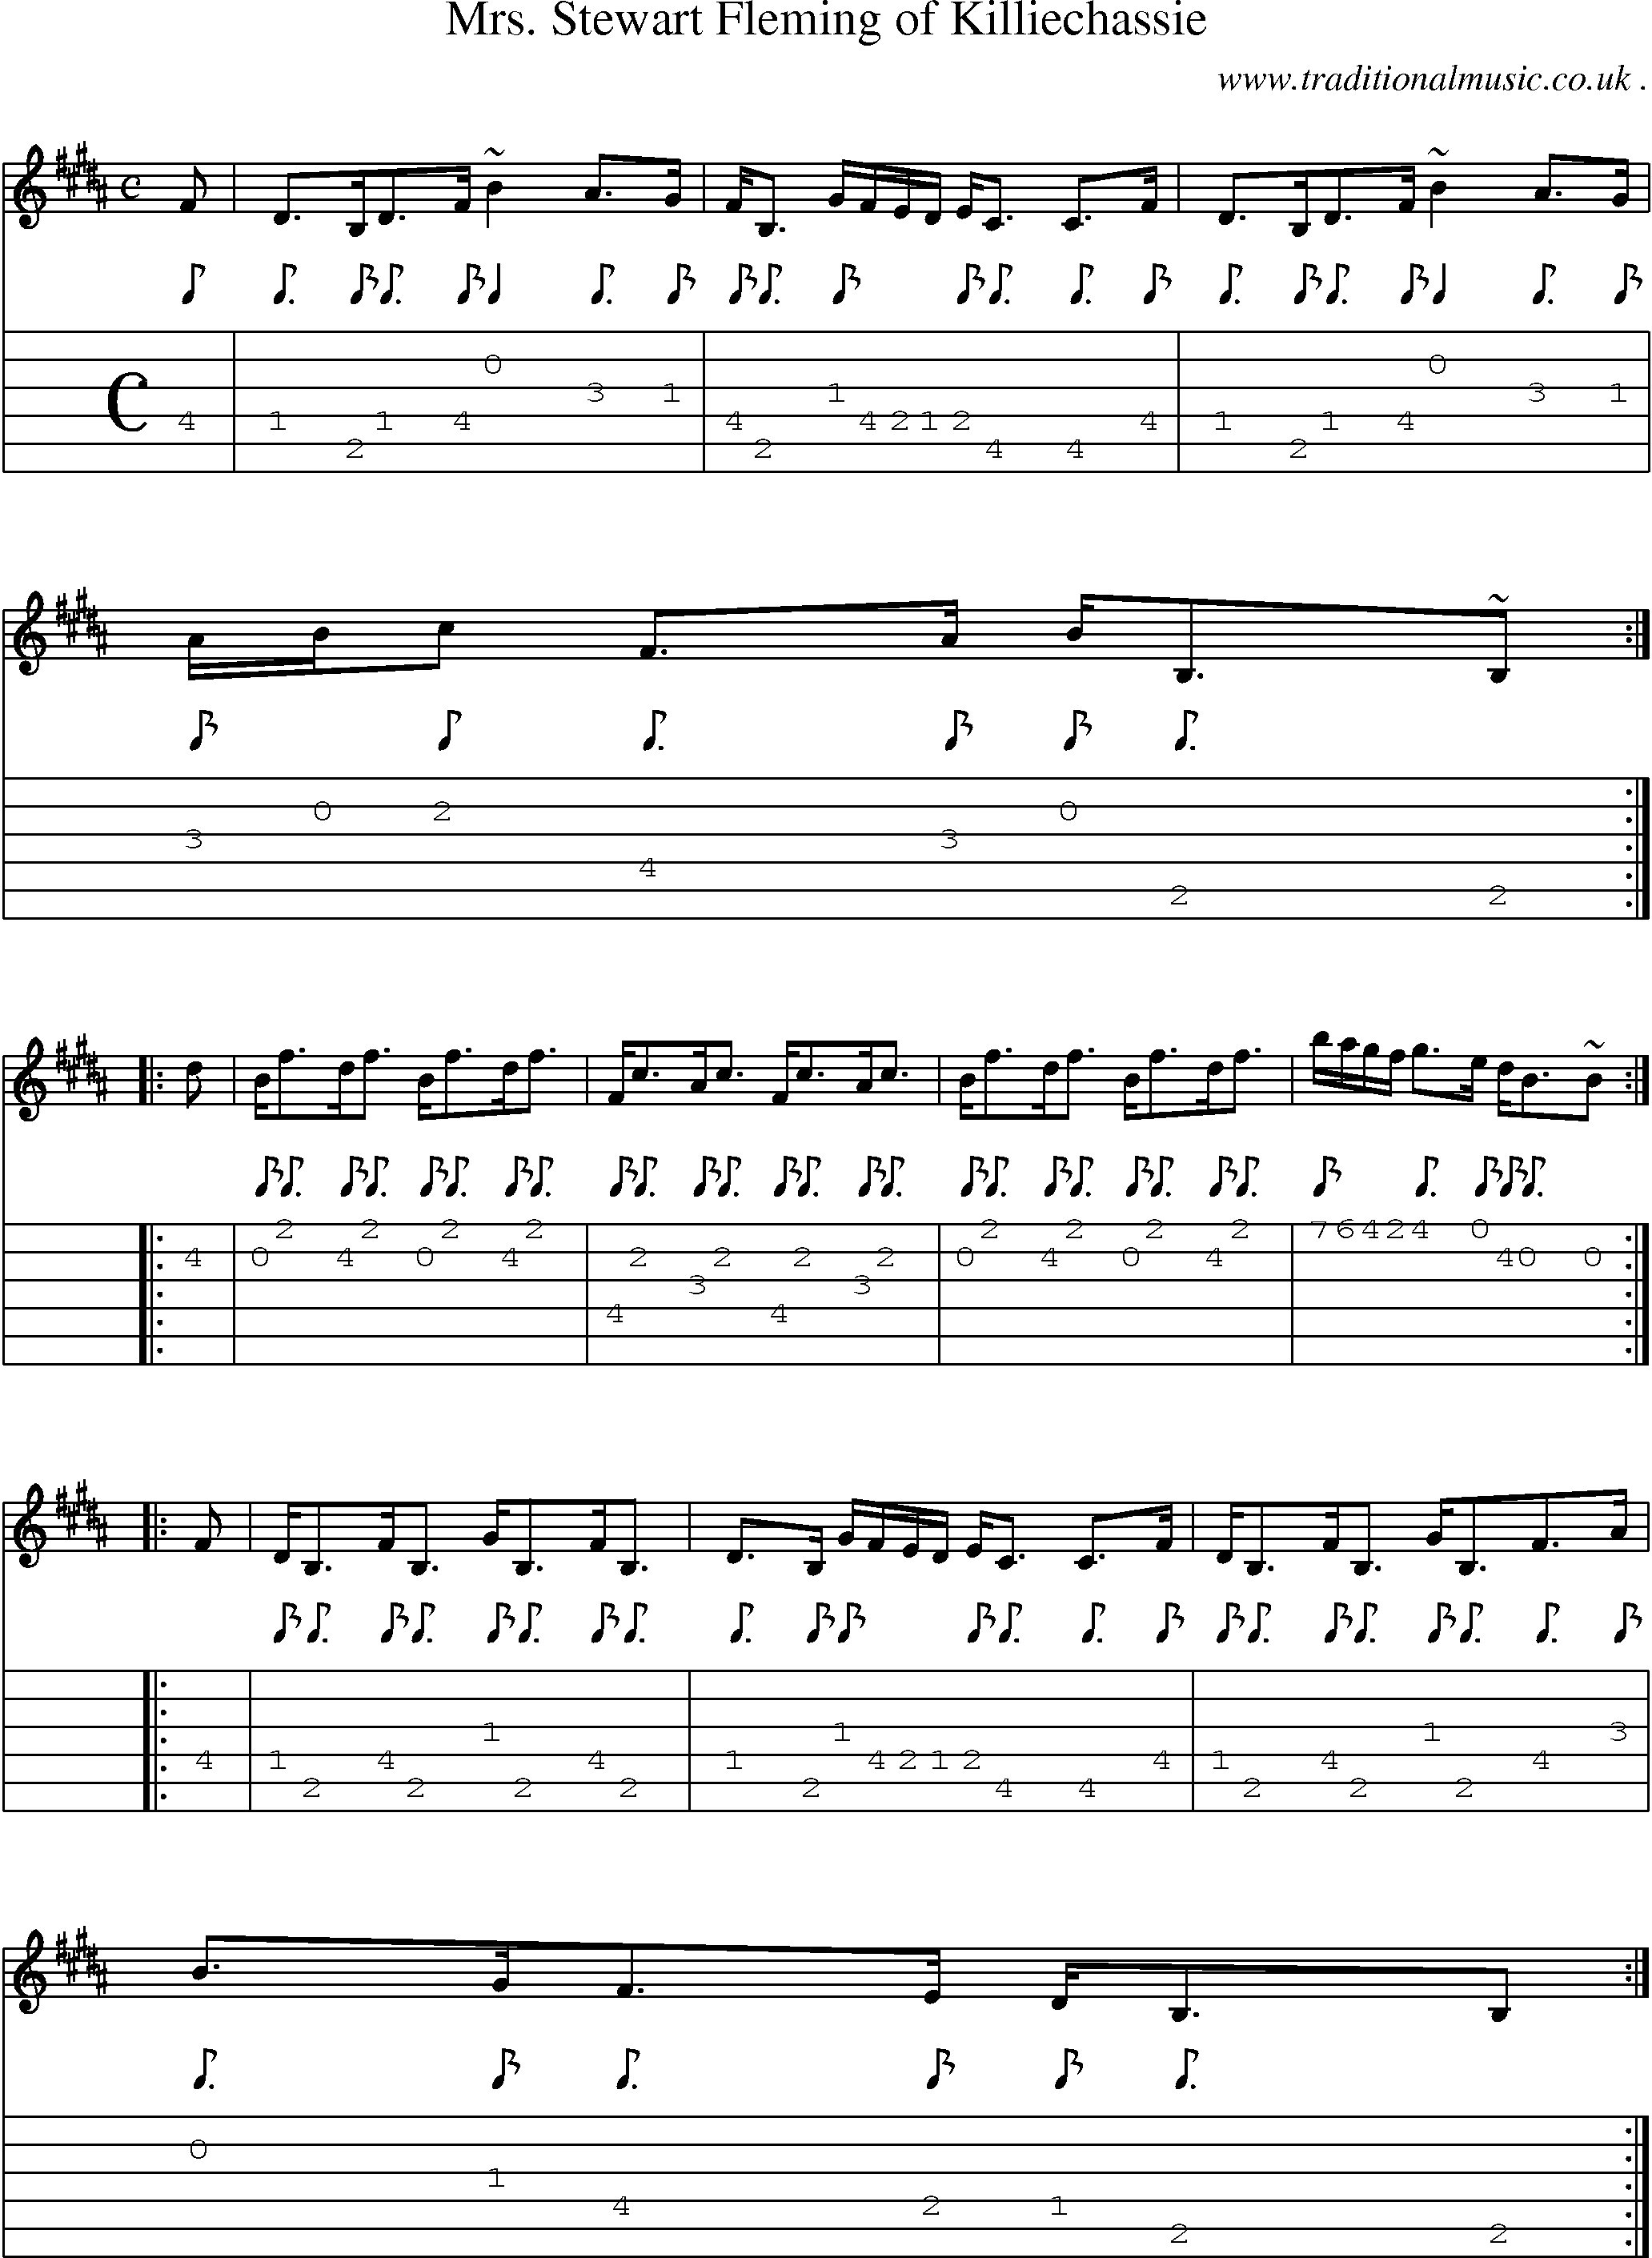 Sheet-music  score, Chords and Guitar Tabs for Mrs Stewart Fleming Of Killiechassie